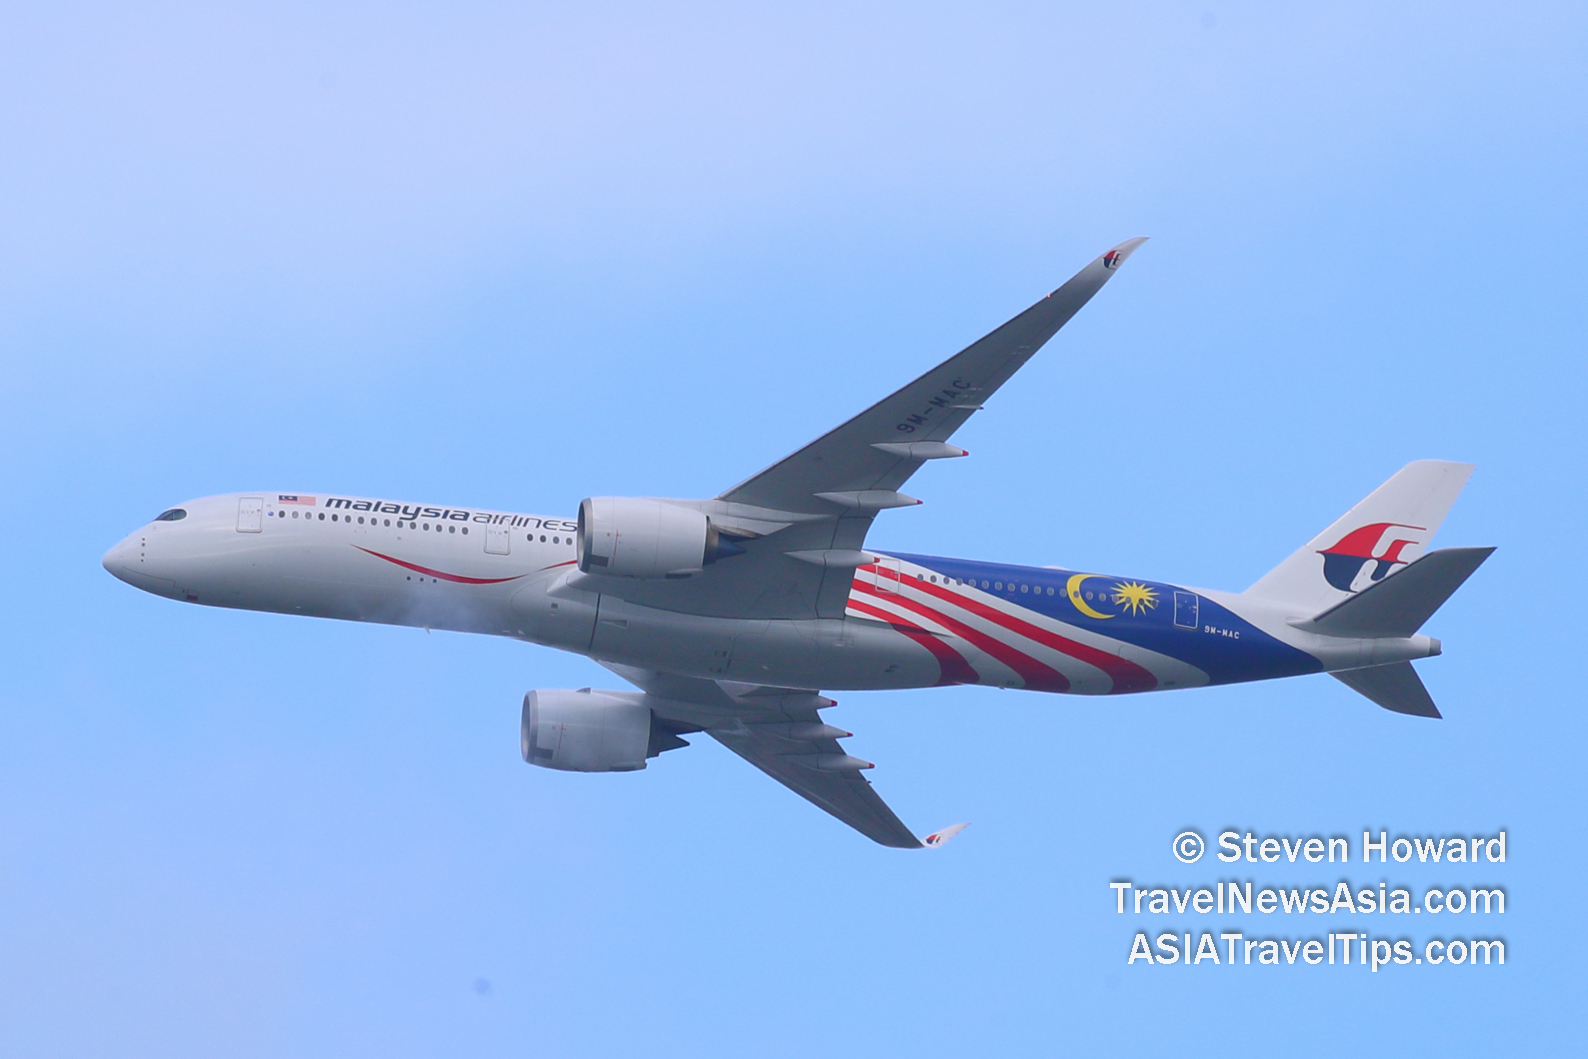 Malaysia Airlines Airbus A350-900 reg: 9M-MAC. Picture by Steven Howard of TravelNewsAsia.com Click to enlarge.